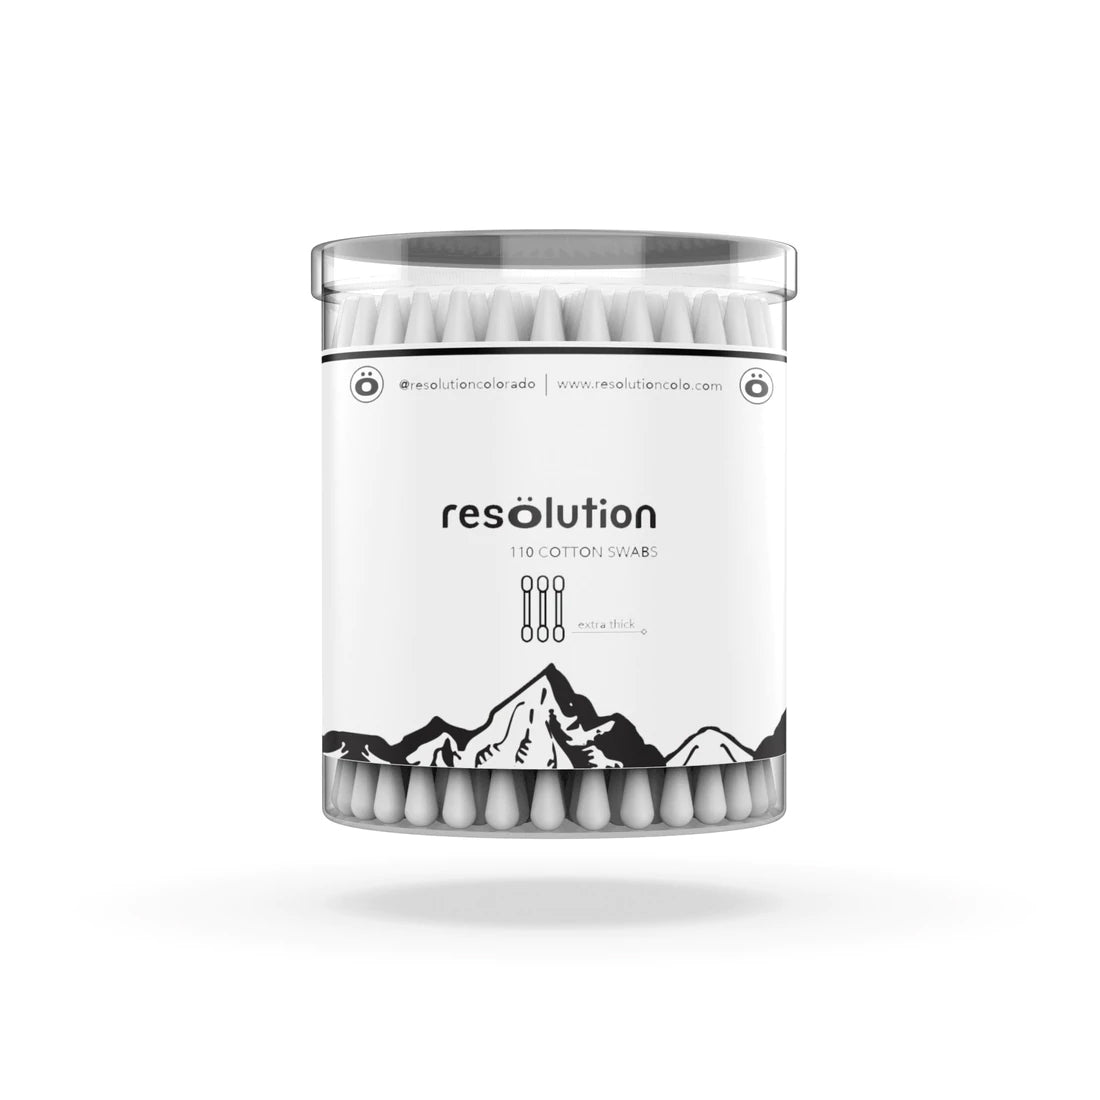 Resolution Cleaning Kit